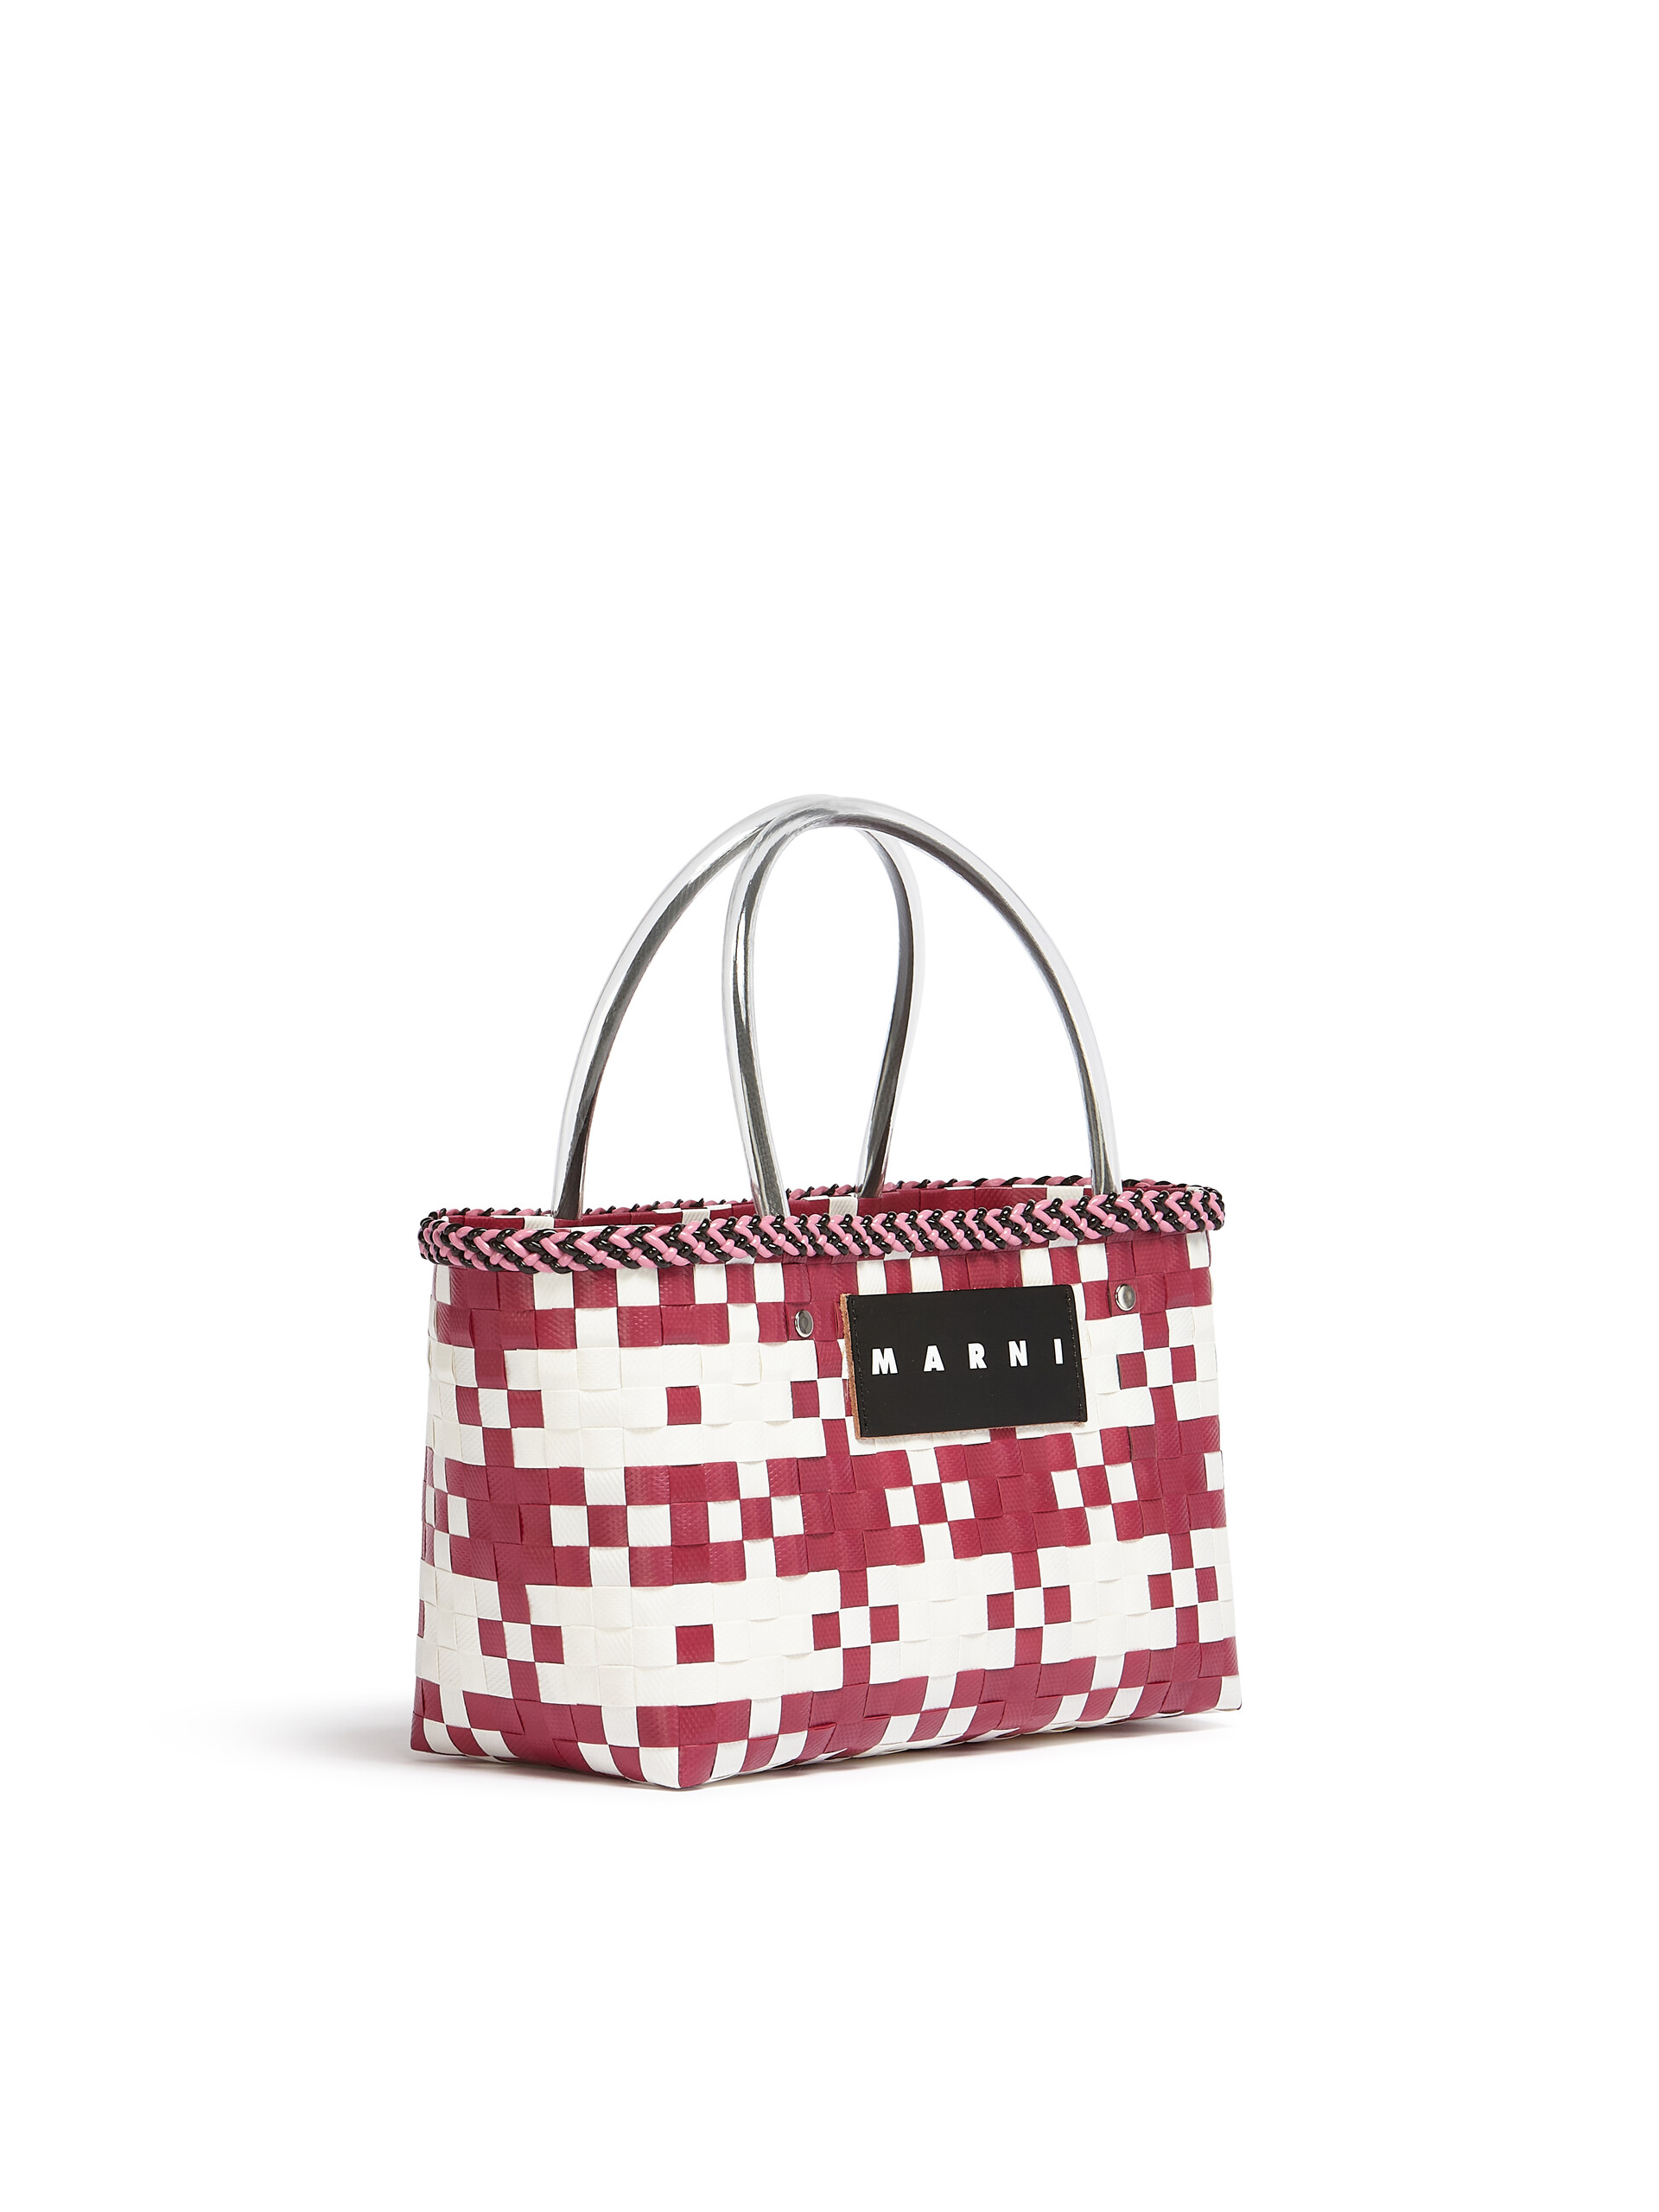 MARNI MARKET CHECK BAG in red and white tartan woven material - Shopping Bags - Image 2